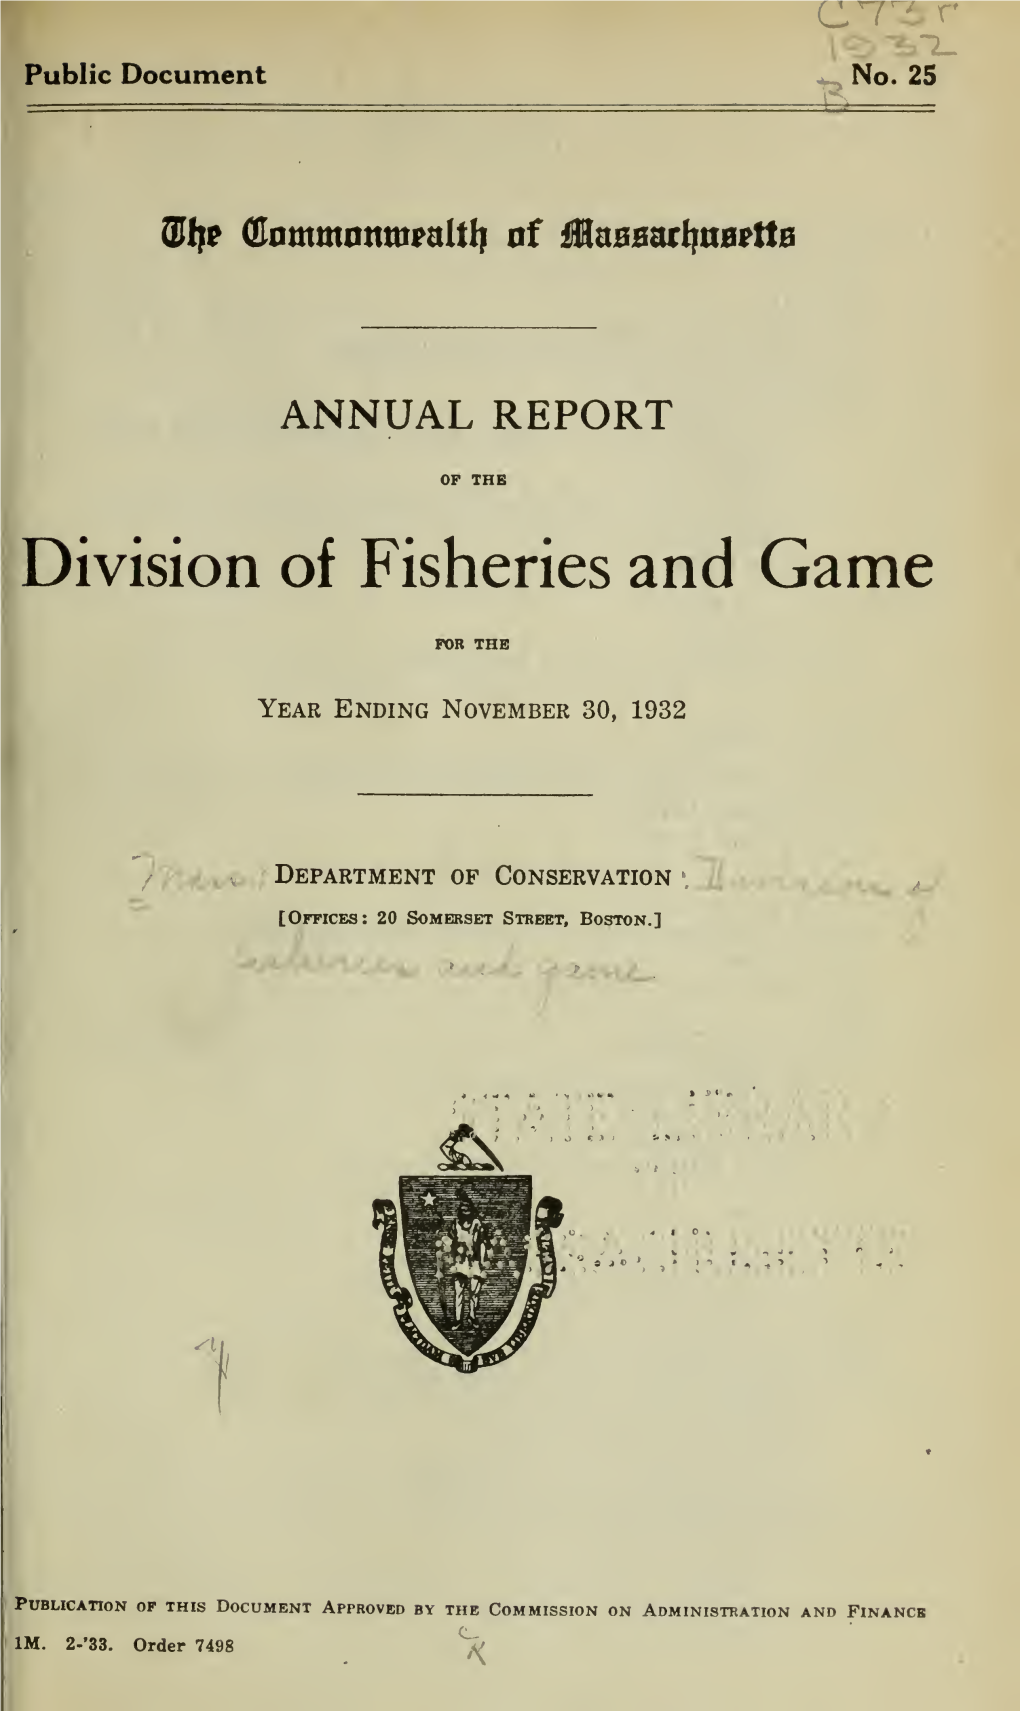 Annual Report of the Division of Fisheries and Game (1920-1933)